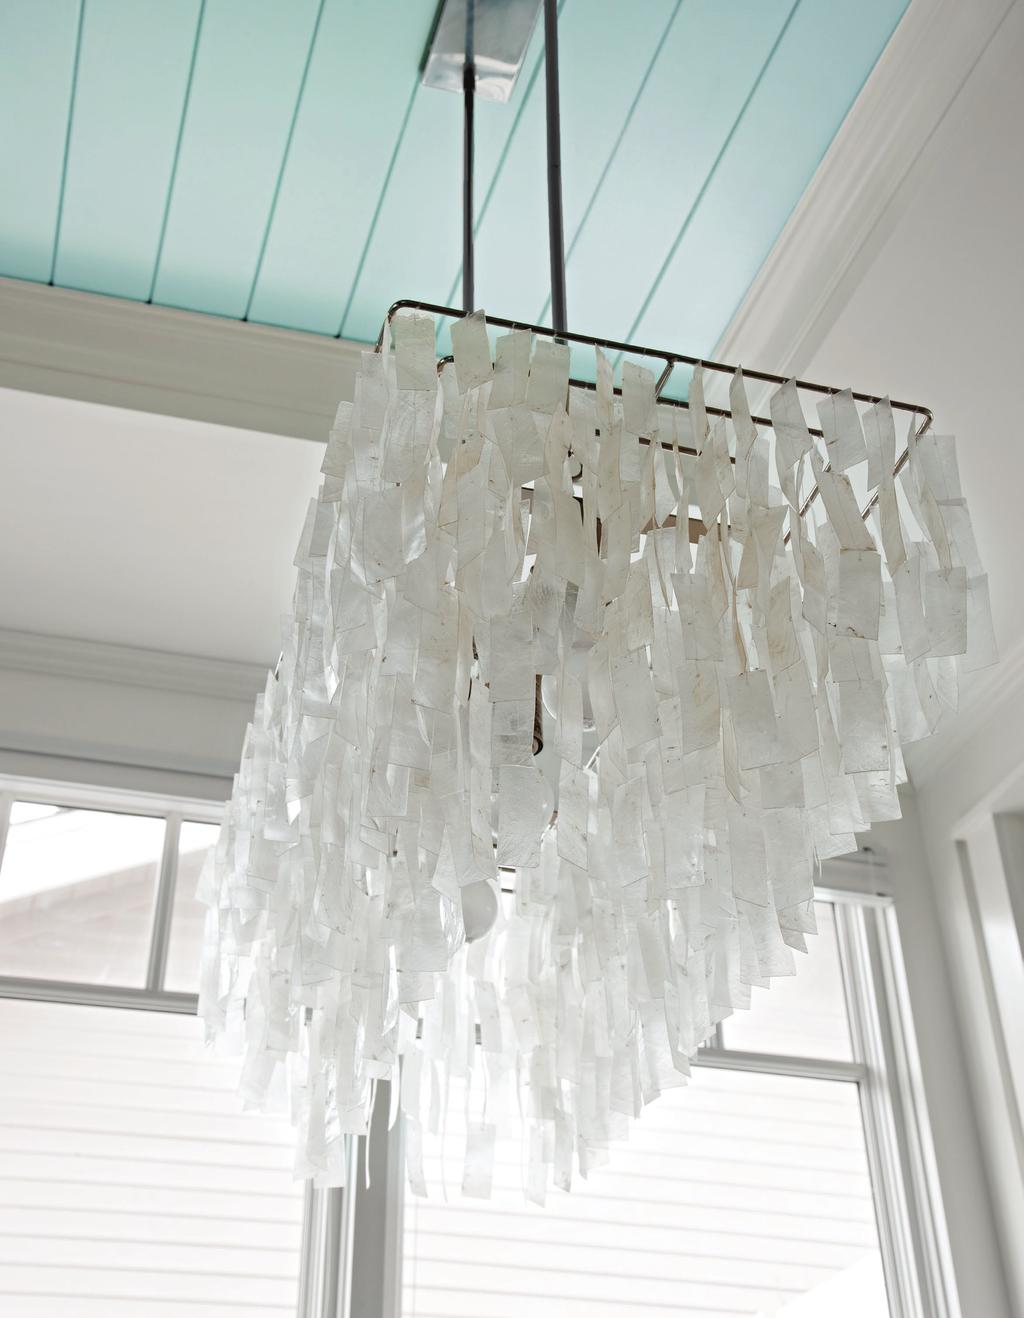 THIS PAGE: Susan loves the capiz shell chandelier above the dining table, which chimes softly in the California breeze when the kitchen s bifold window and door are open.